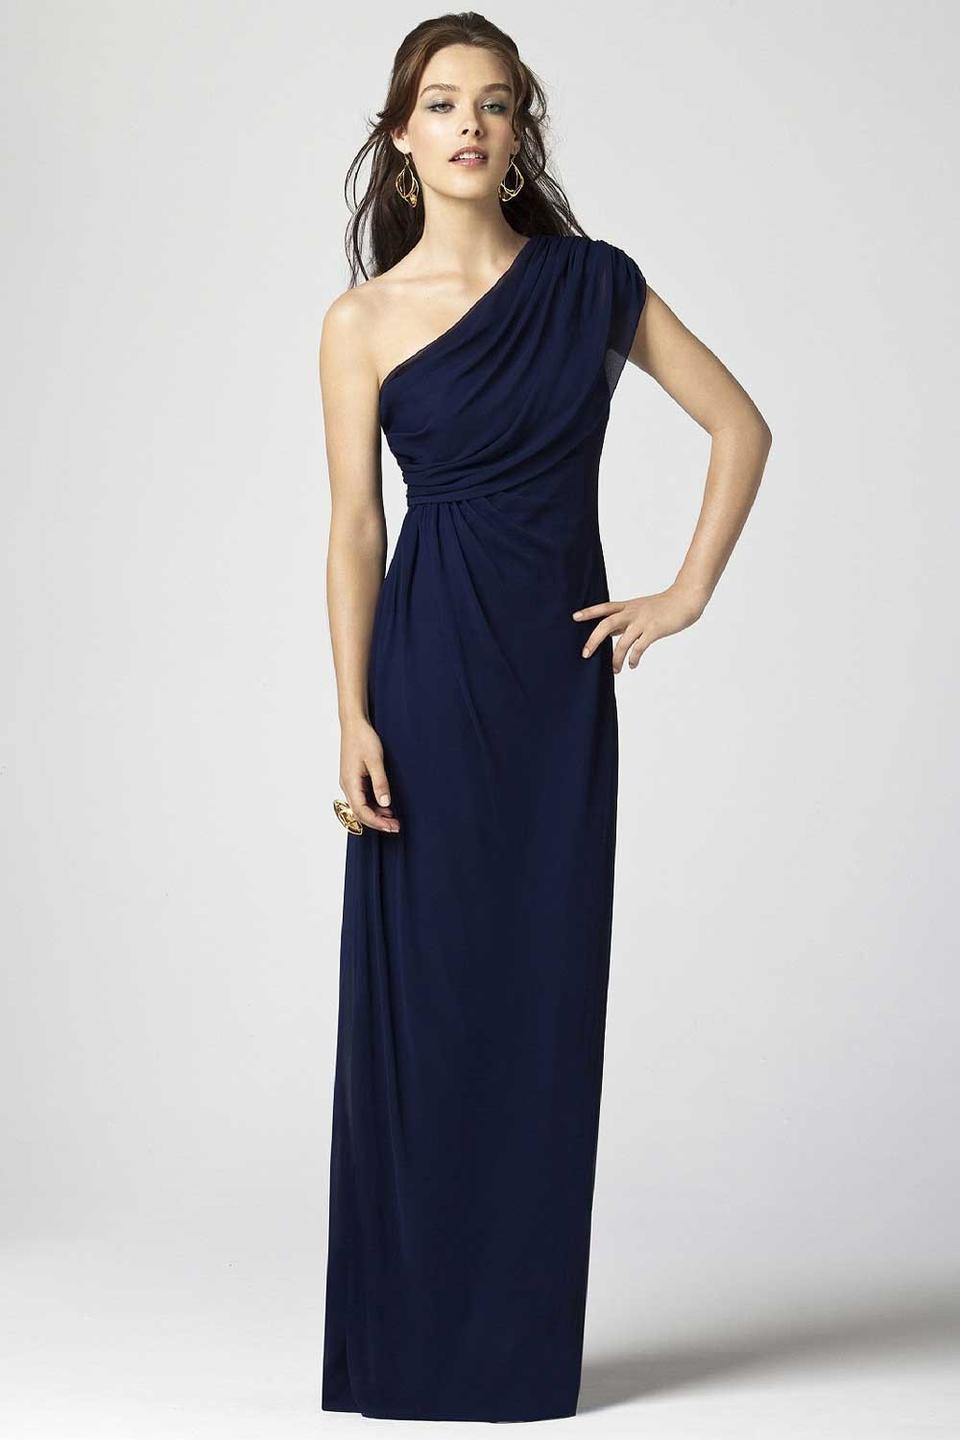 The Best Navy Bridesmaid Dresses - hitched.co.uk - hitched.co.uk